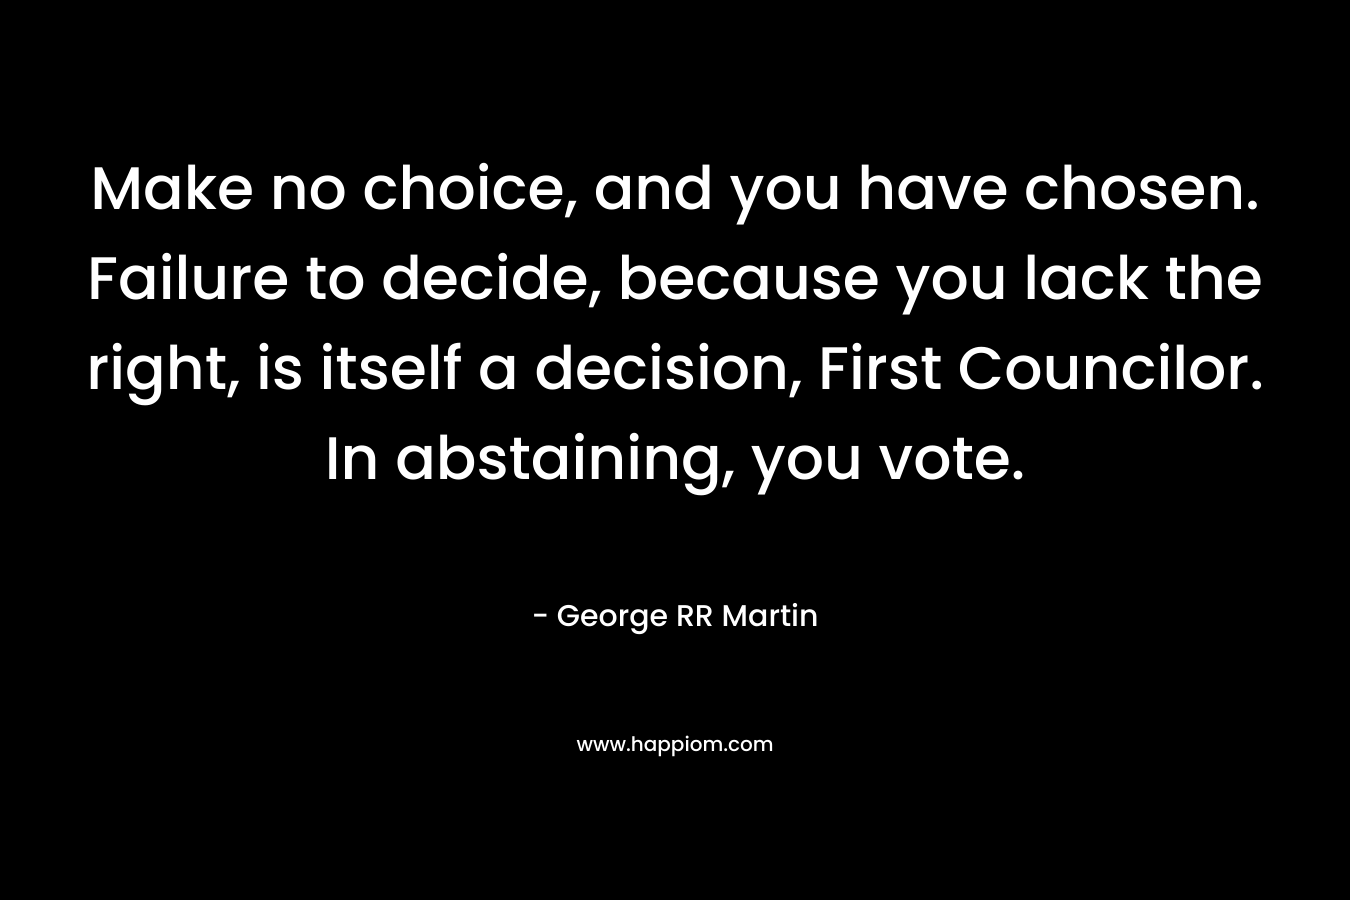 Make no choice, and you have chosen. Failure to decide, because you lack the right, is itself a decision, First Councilor. In abstaining, you vote. – George RR Martin